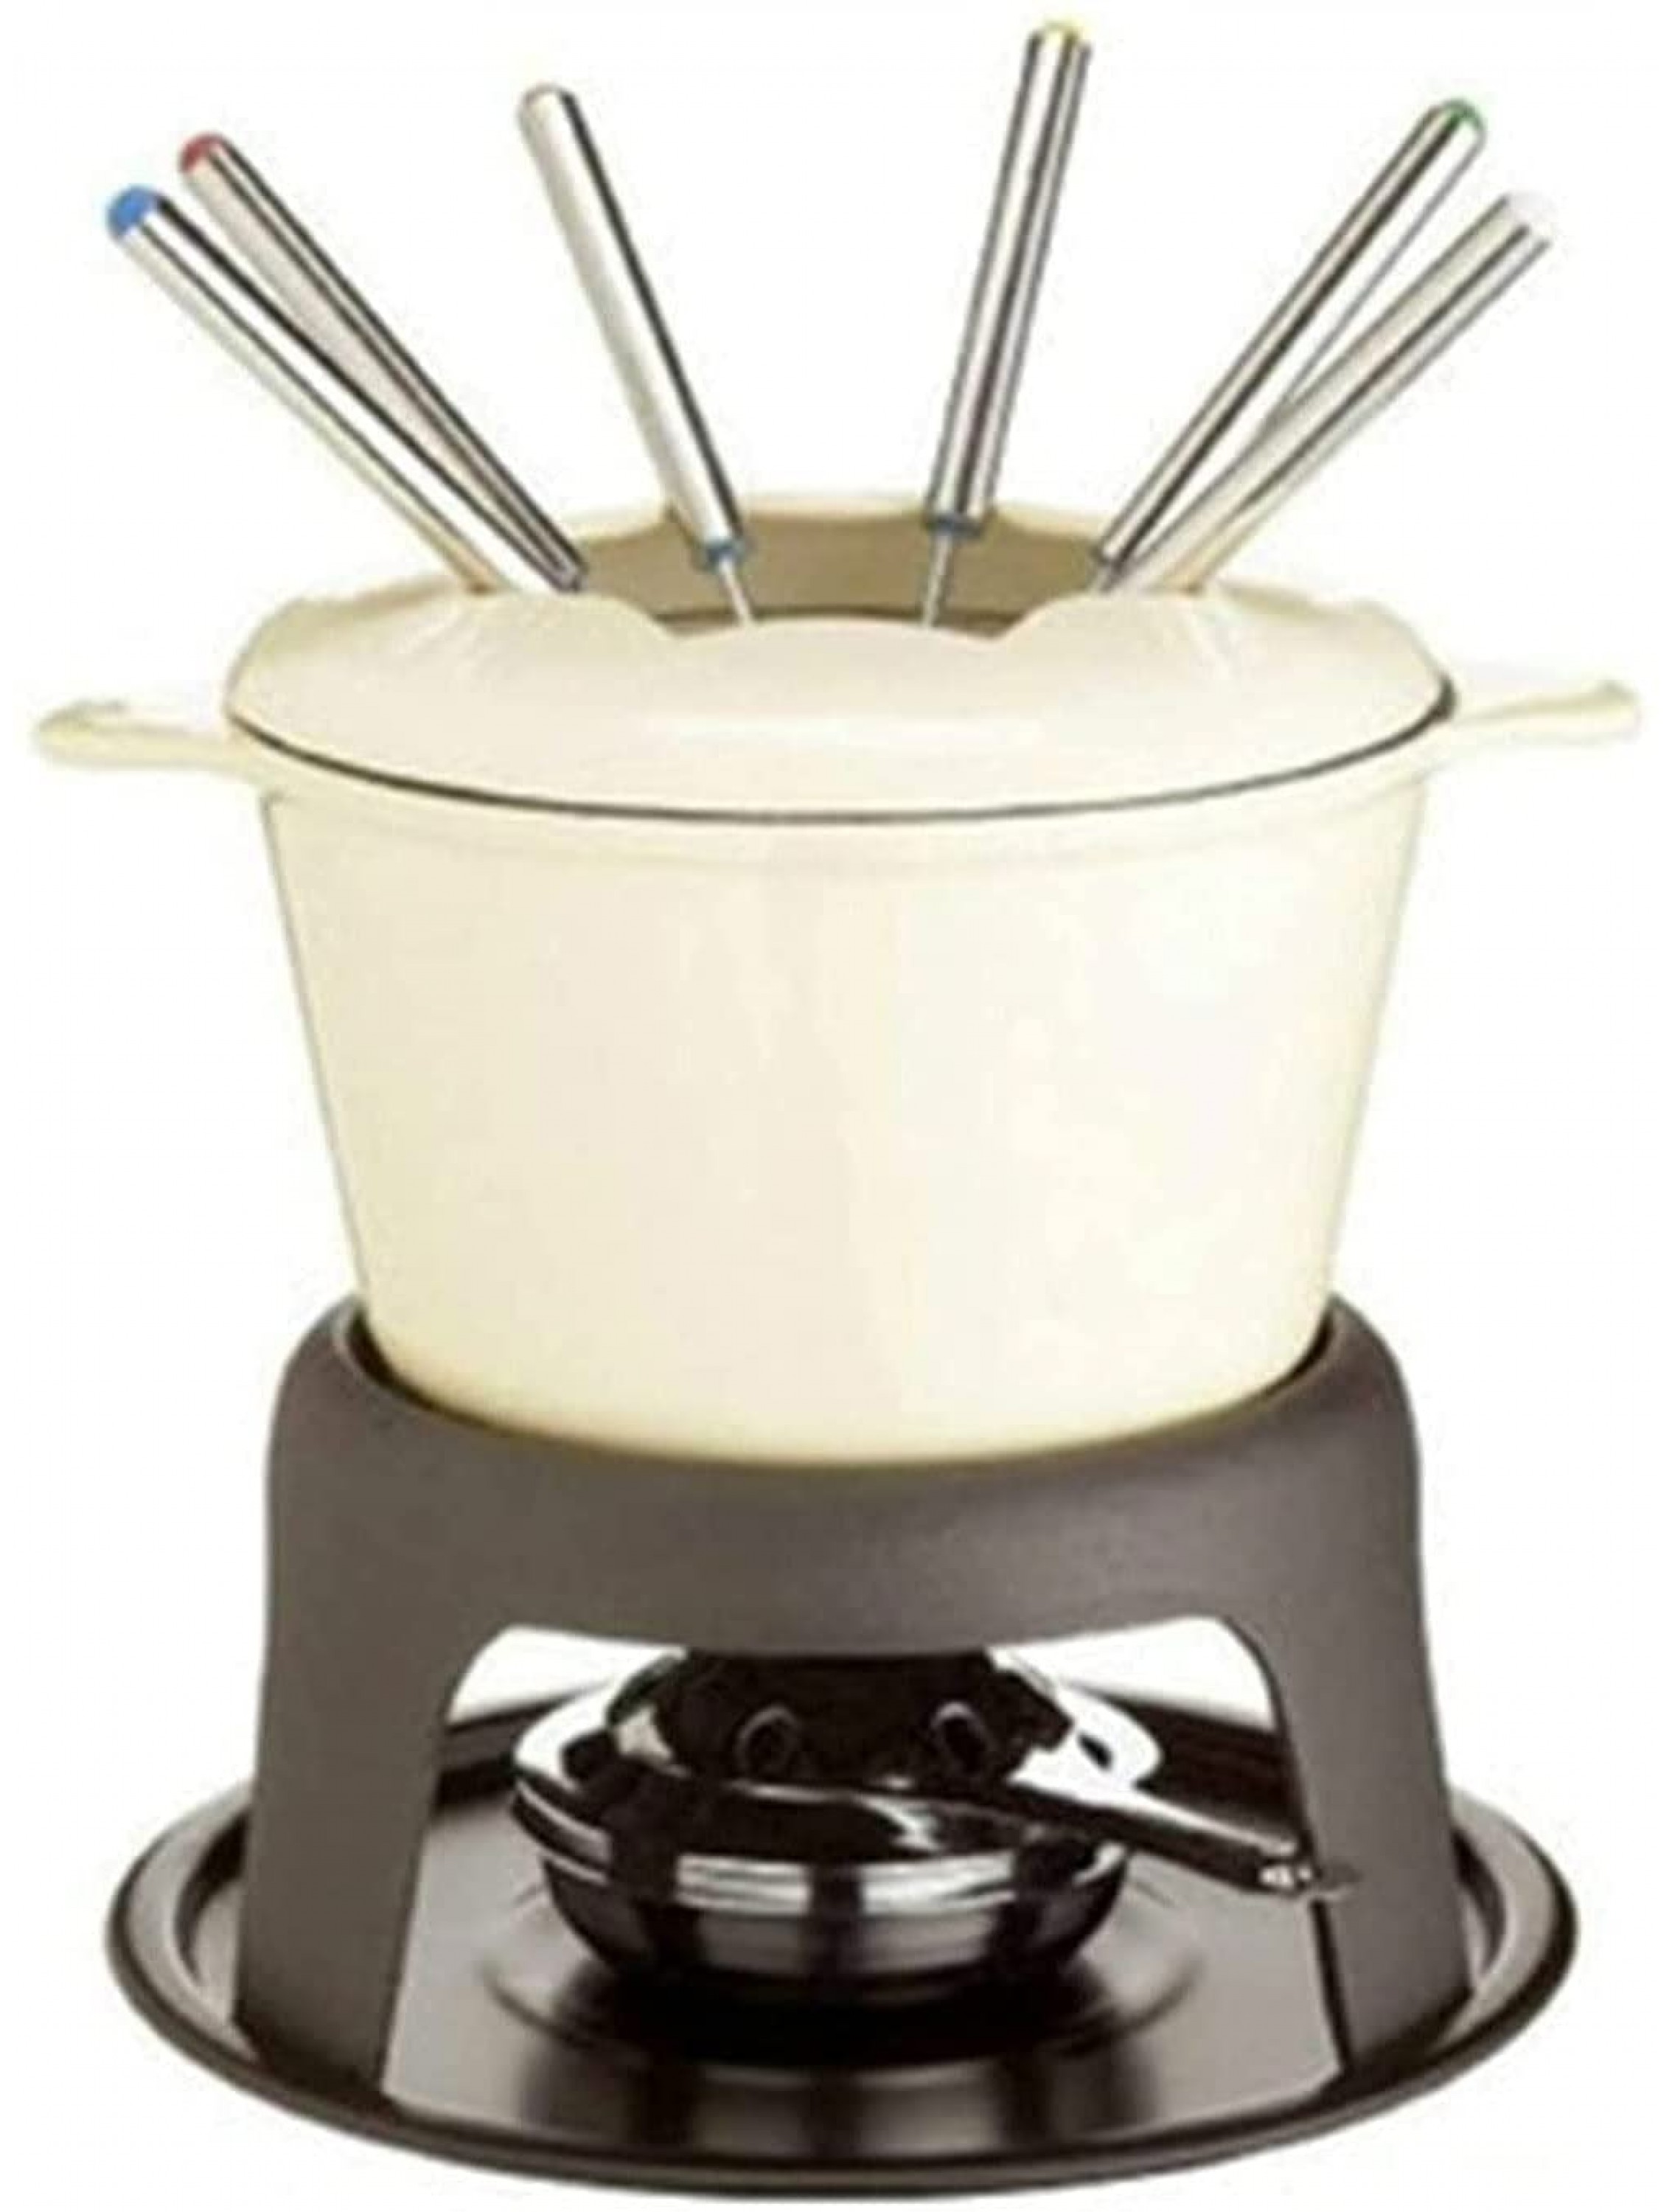 NesRabbit Cast Iron Fondue Sets Fondue Mix with 6 Fondue Forks Kitchen Accessories Prefect for Entertaining Dinner Parties and Special Occasions - BMJCHV5PW